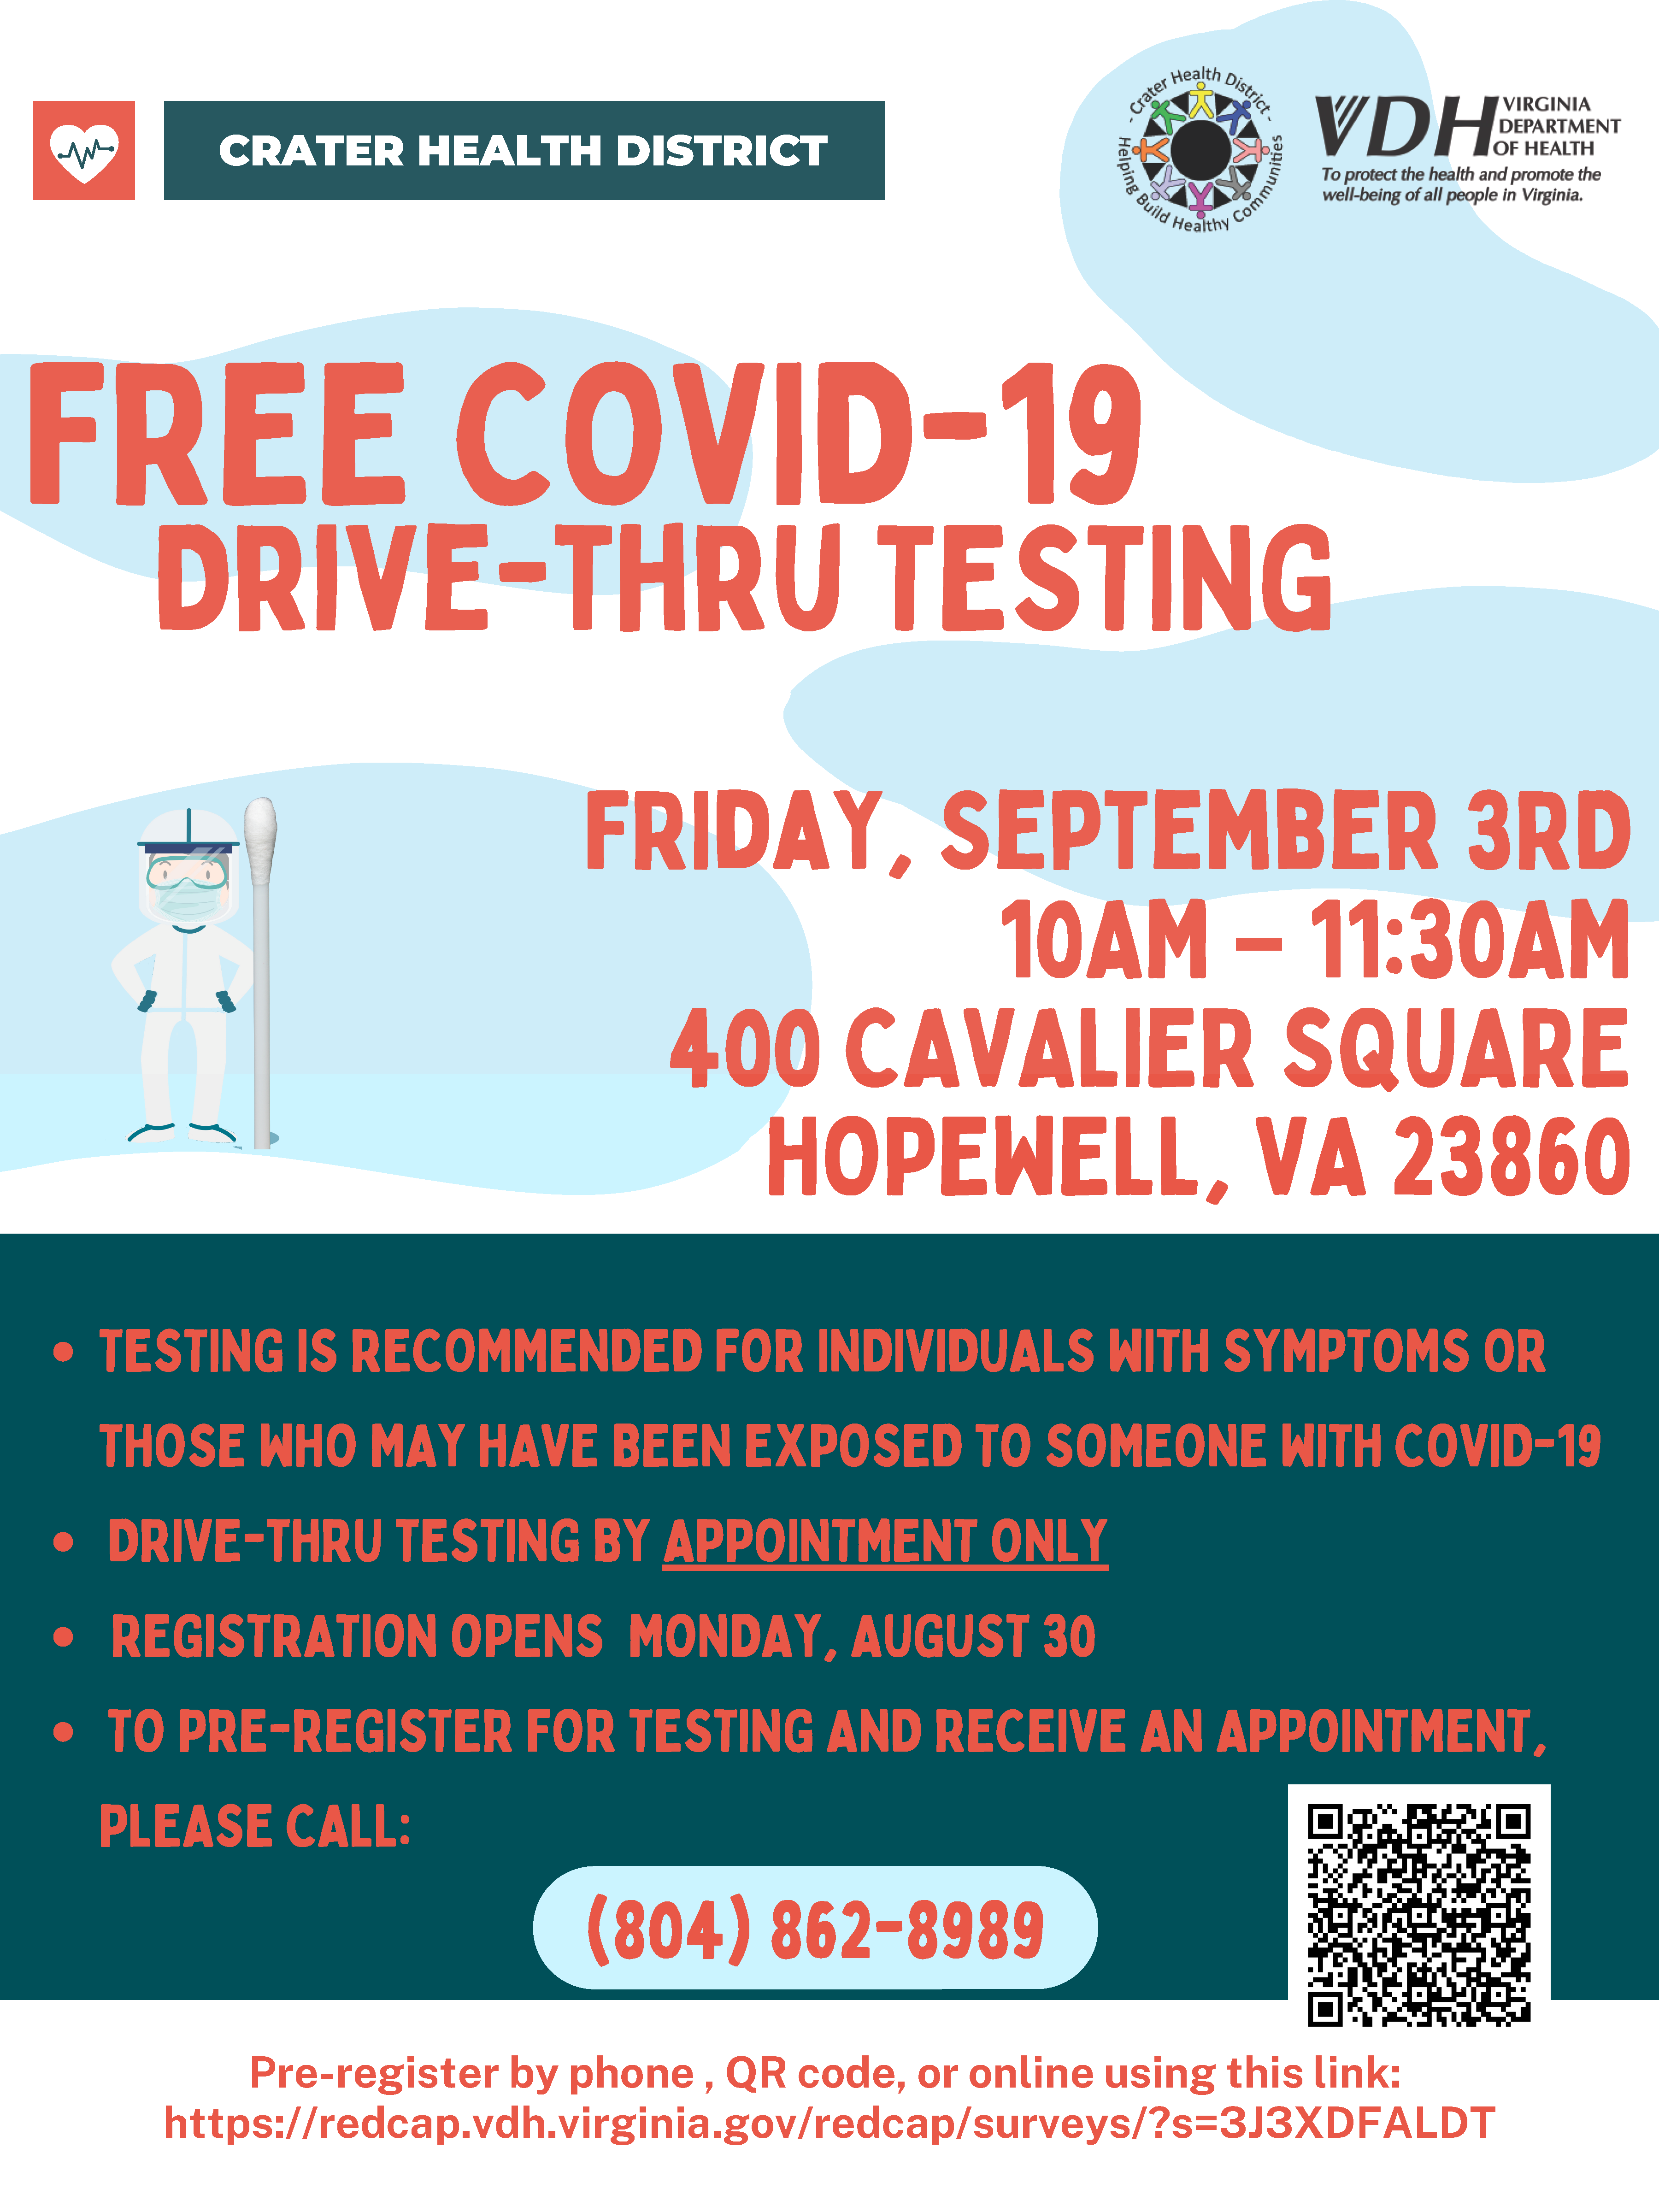 the image is a flyer for the community covid testing event scheduled on 9/3/21